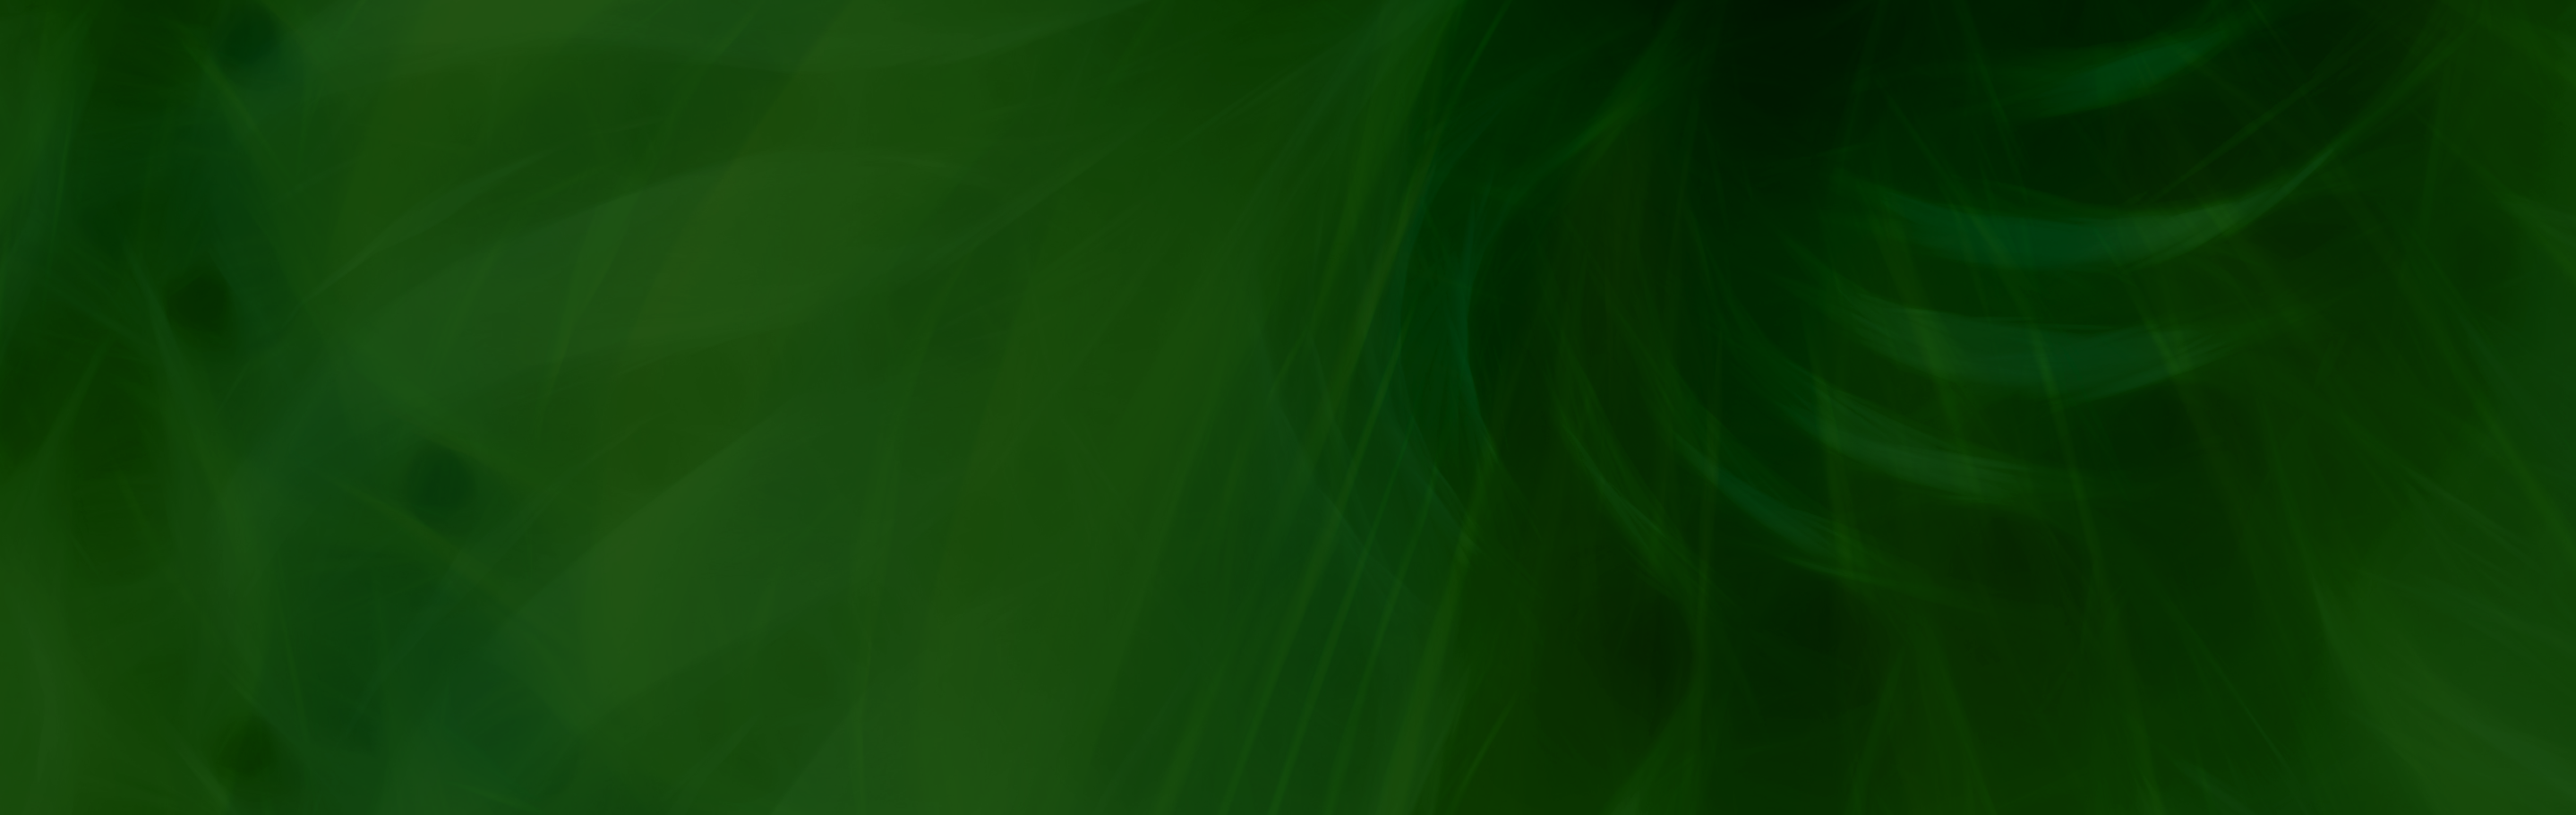 Green Background Image with textured swirl